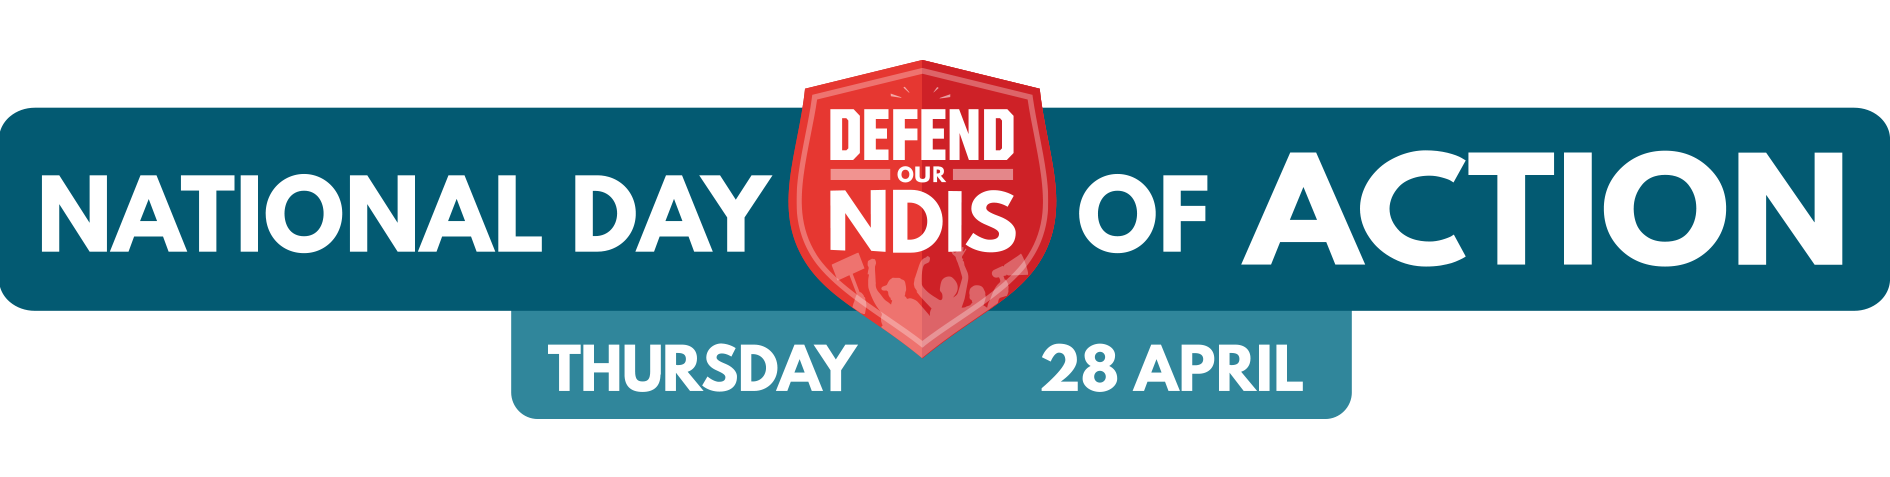 National Day of Action Thursday 28 April with Defend our NDIS shield